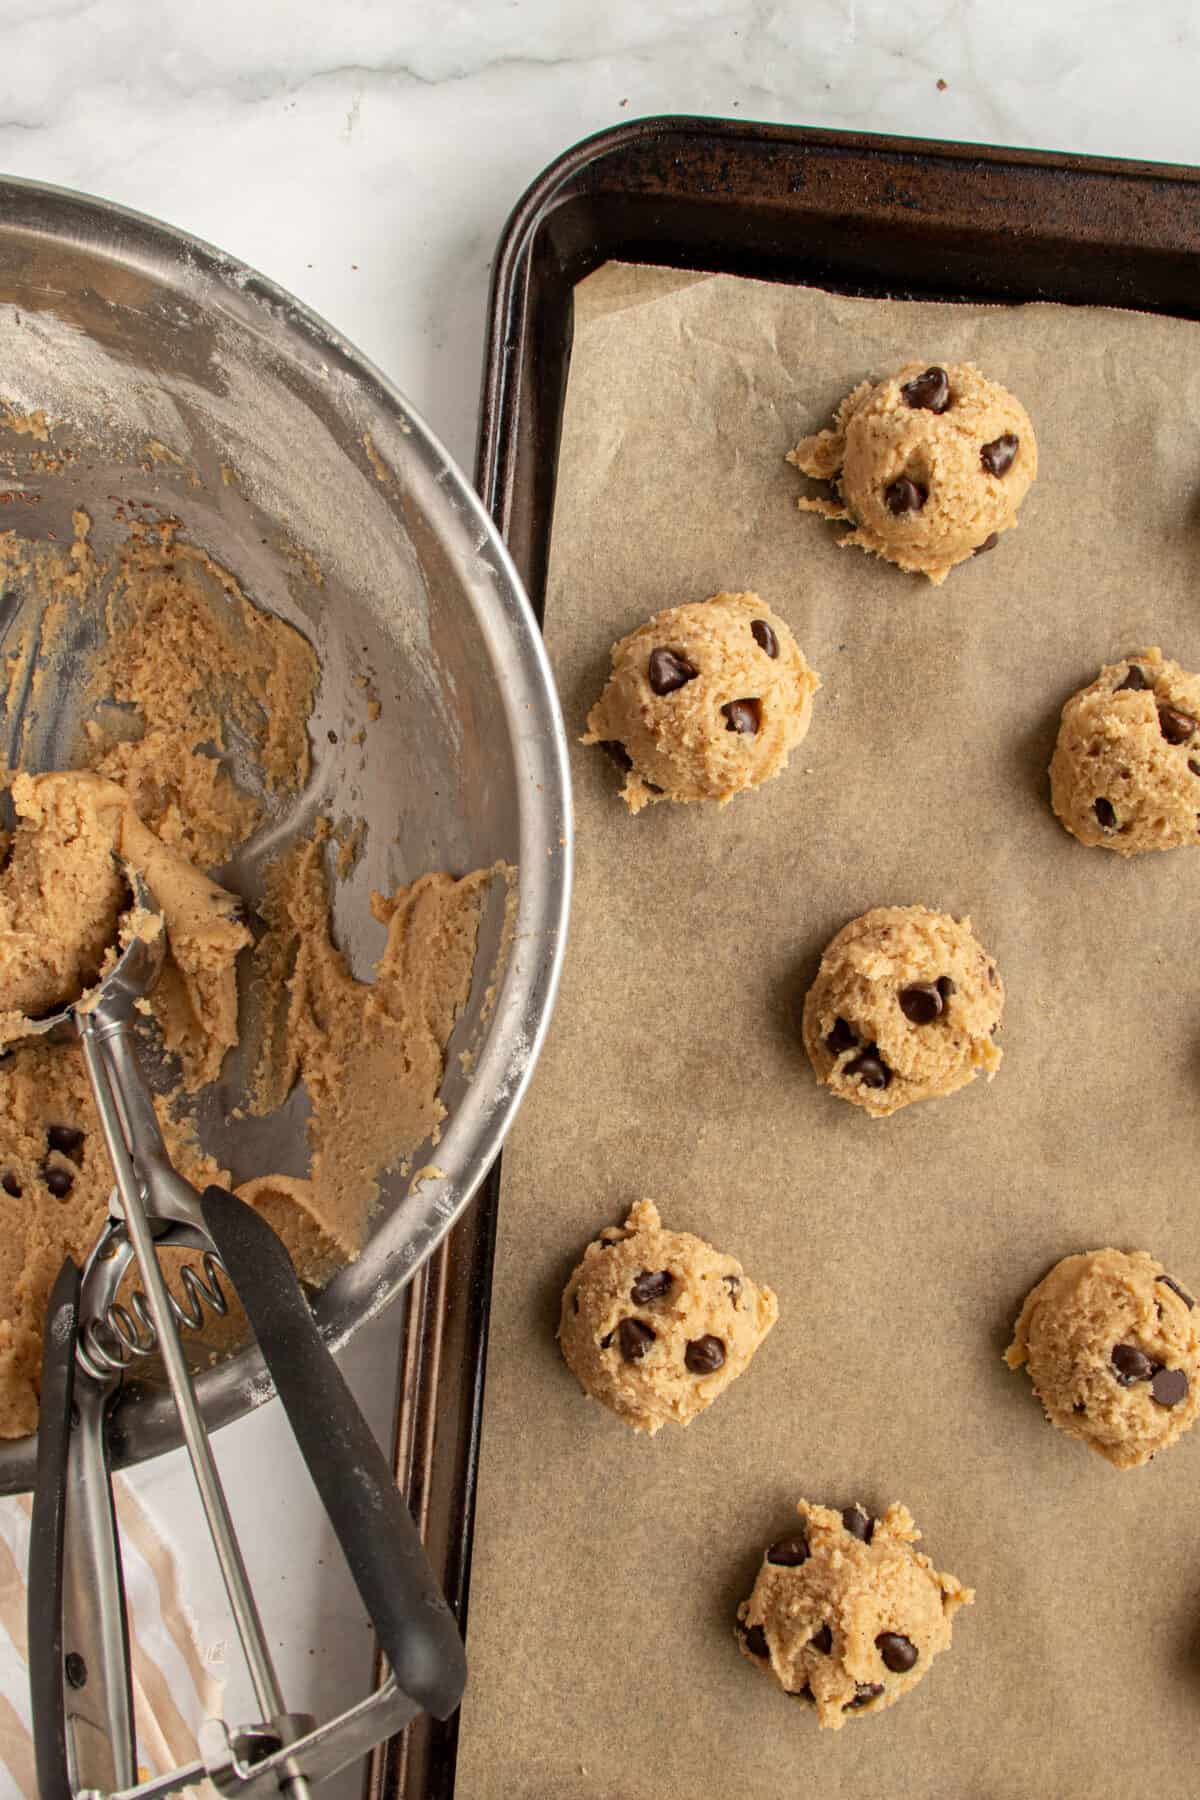 Balls of banana peanut butter chocolate chip cookie dough on a lined baking sheet.